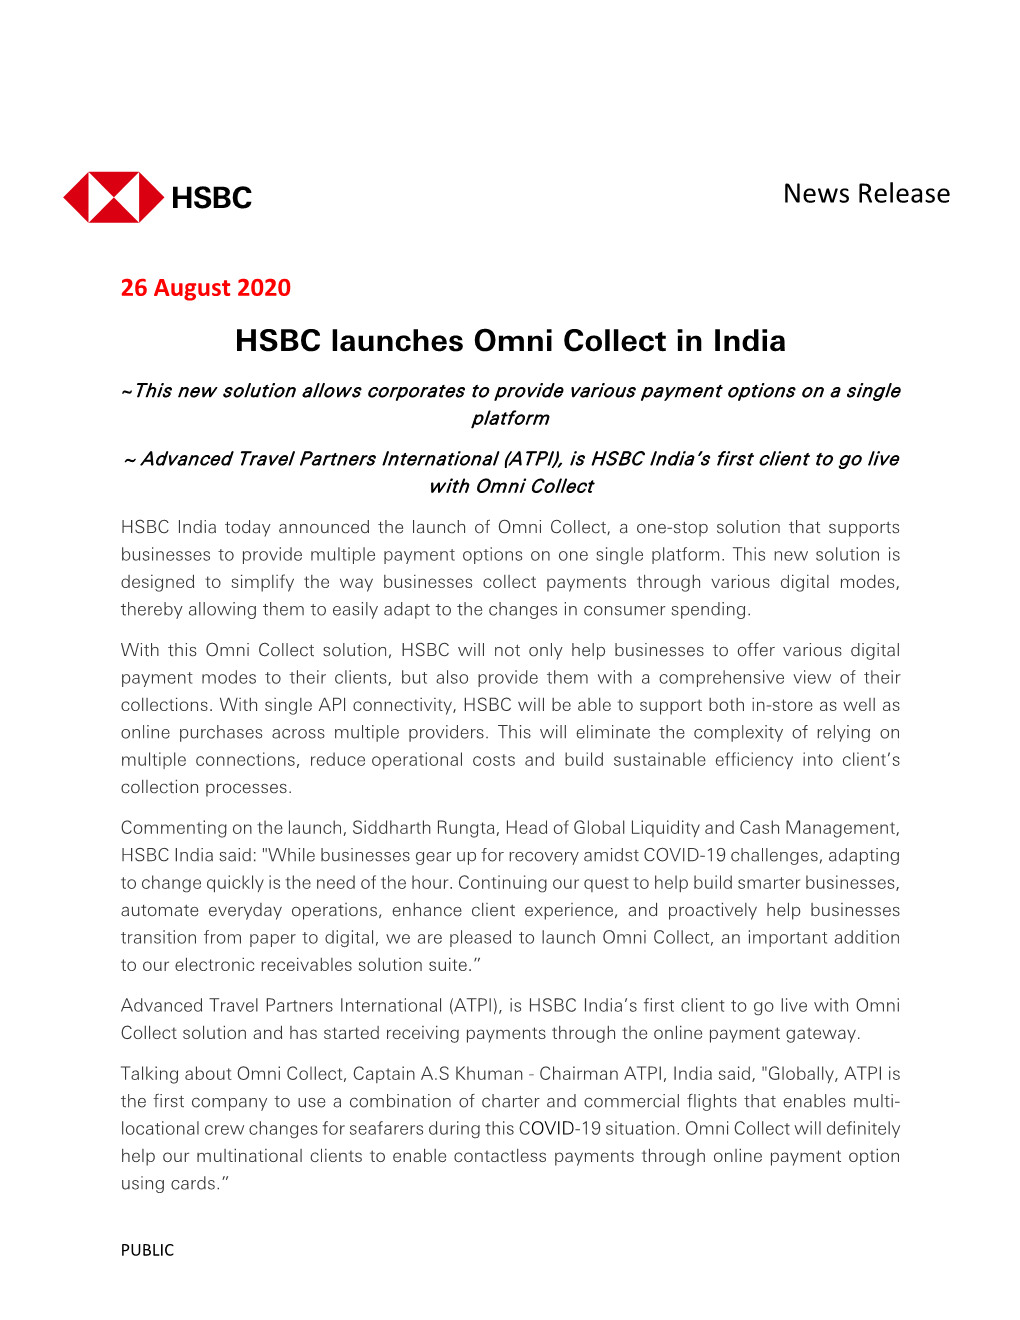 HSBC Launches Omni Collect in India